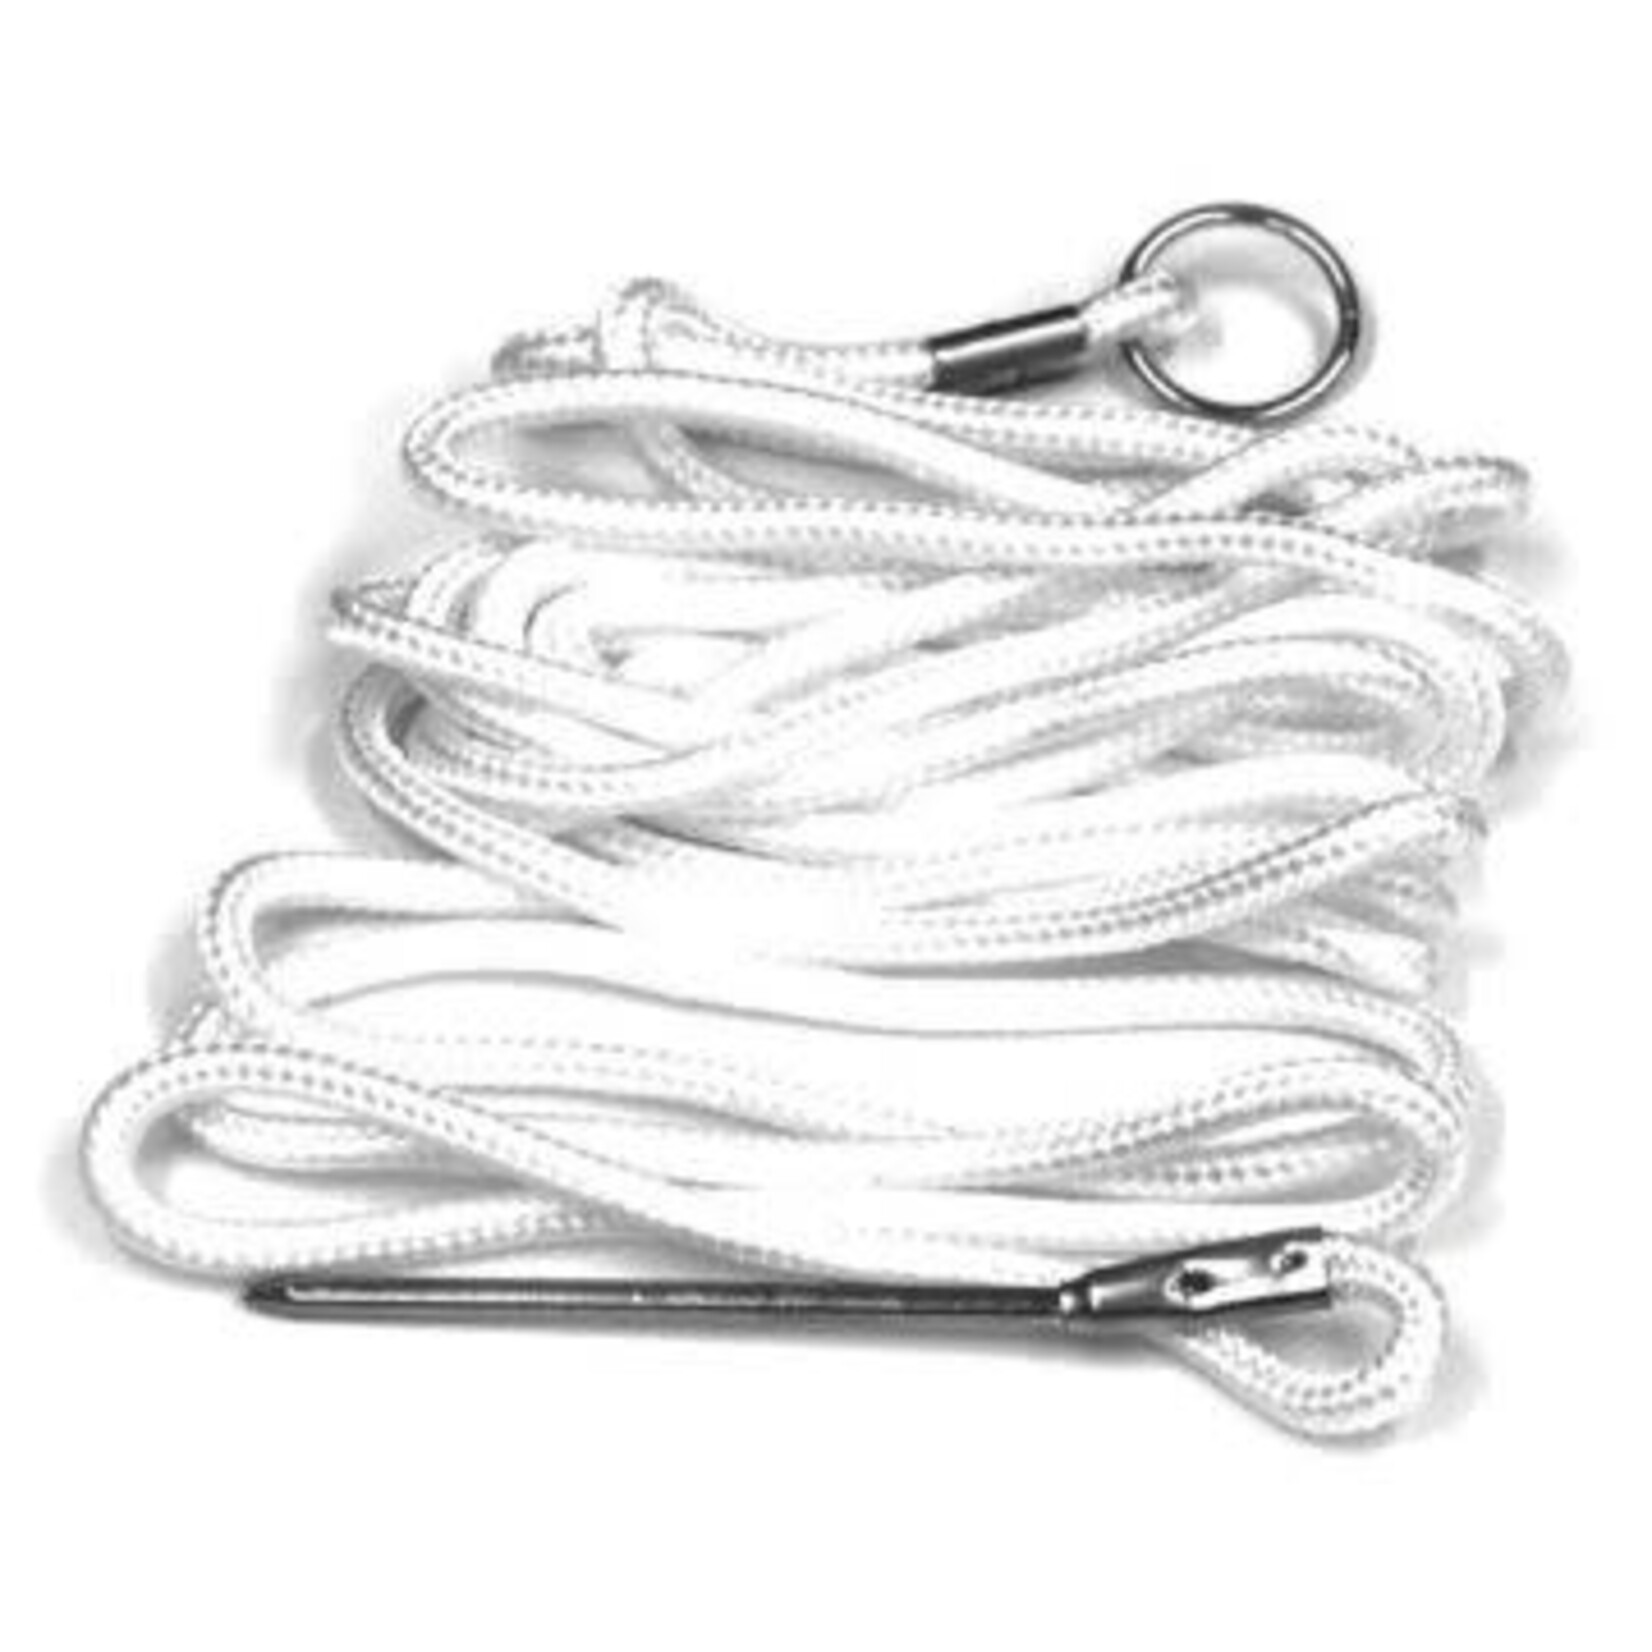 WRIGHT & MCGILL CO. EAGLE CLAW 15' STRINGER HEAVY DUTY WHITE CORDED